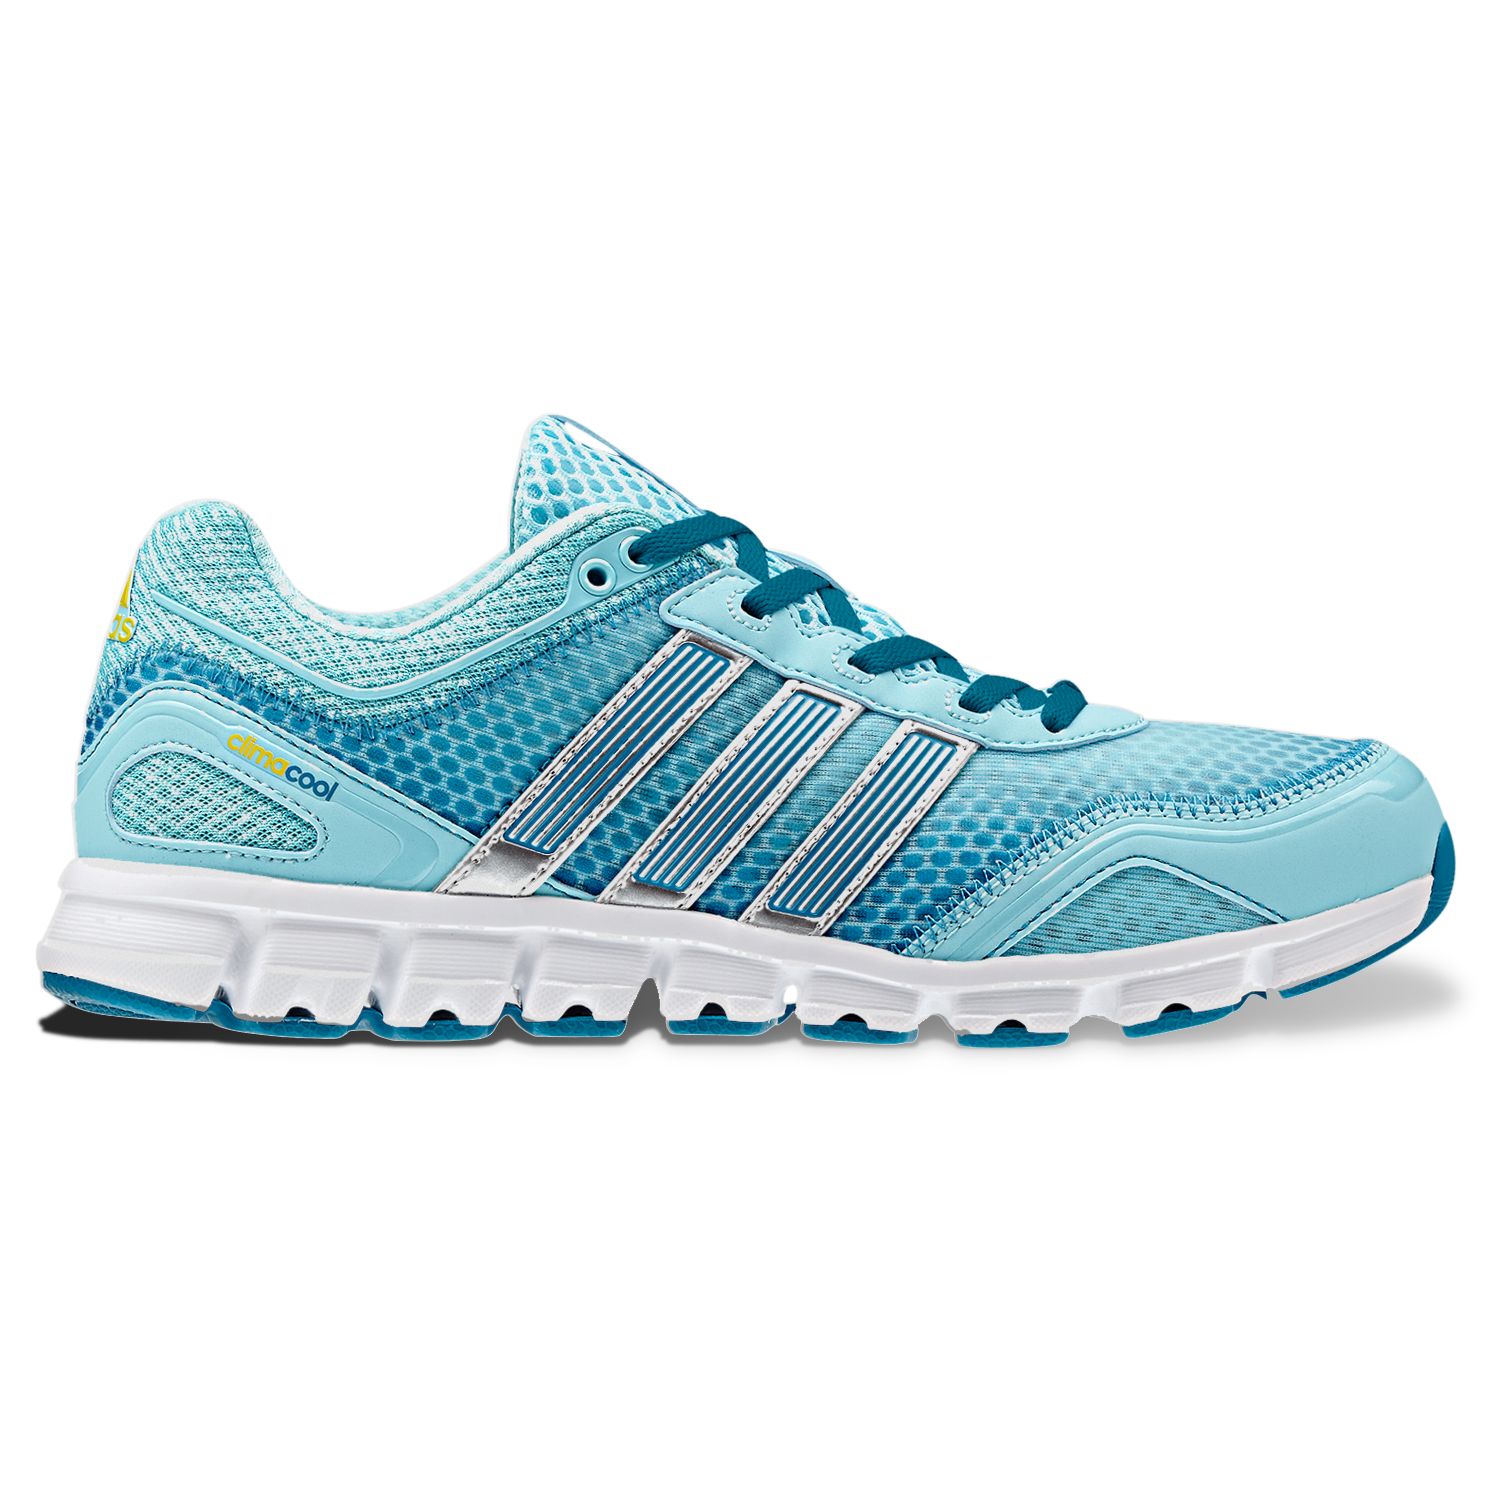 adidas climacool ladies running shoes